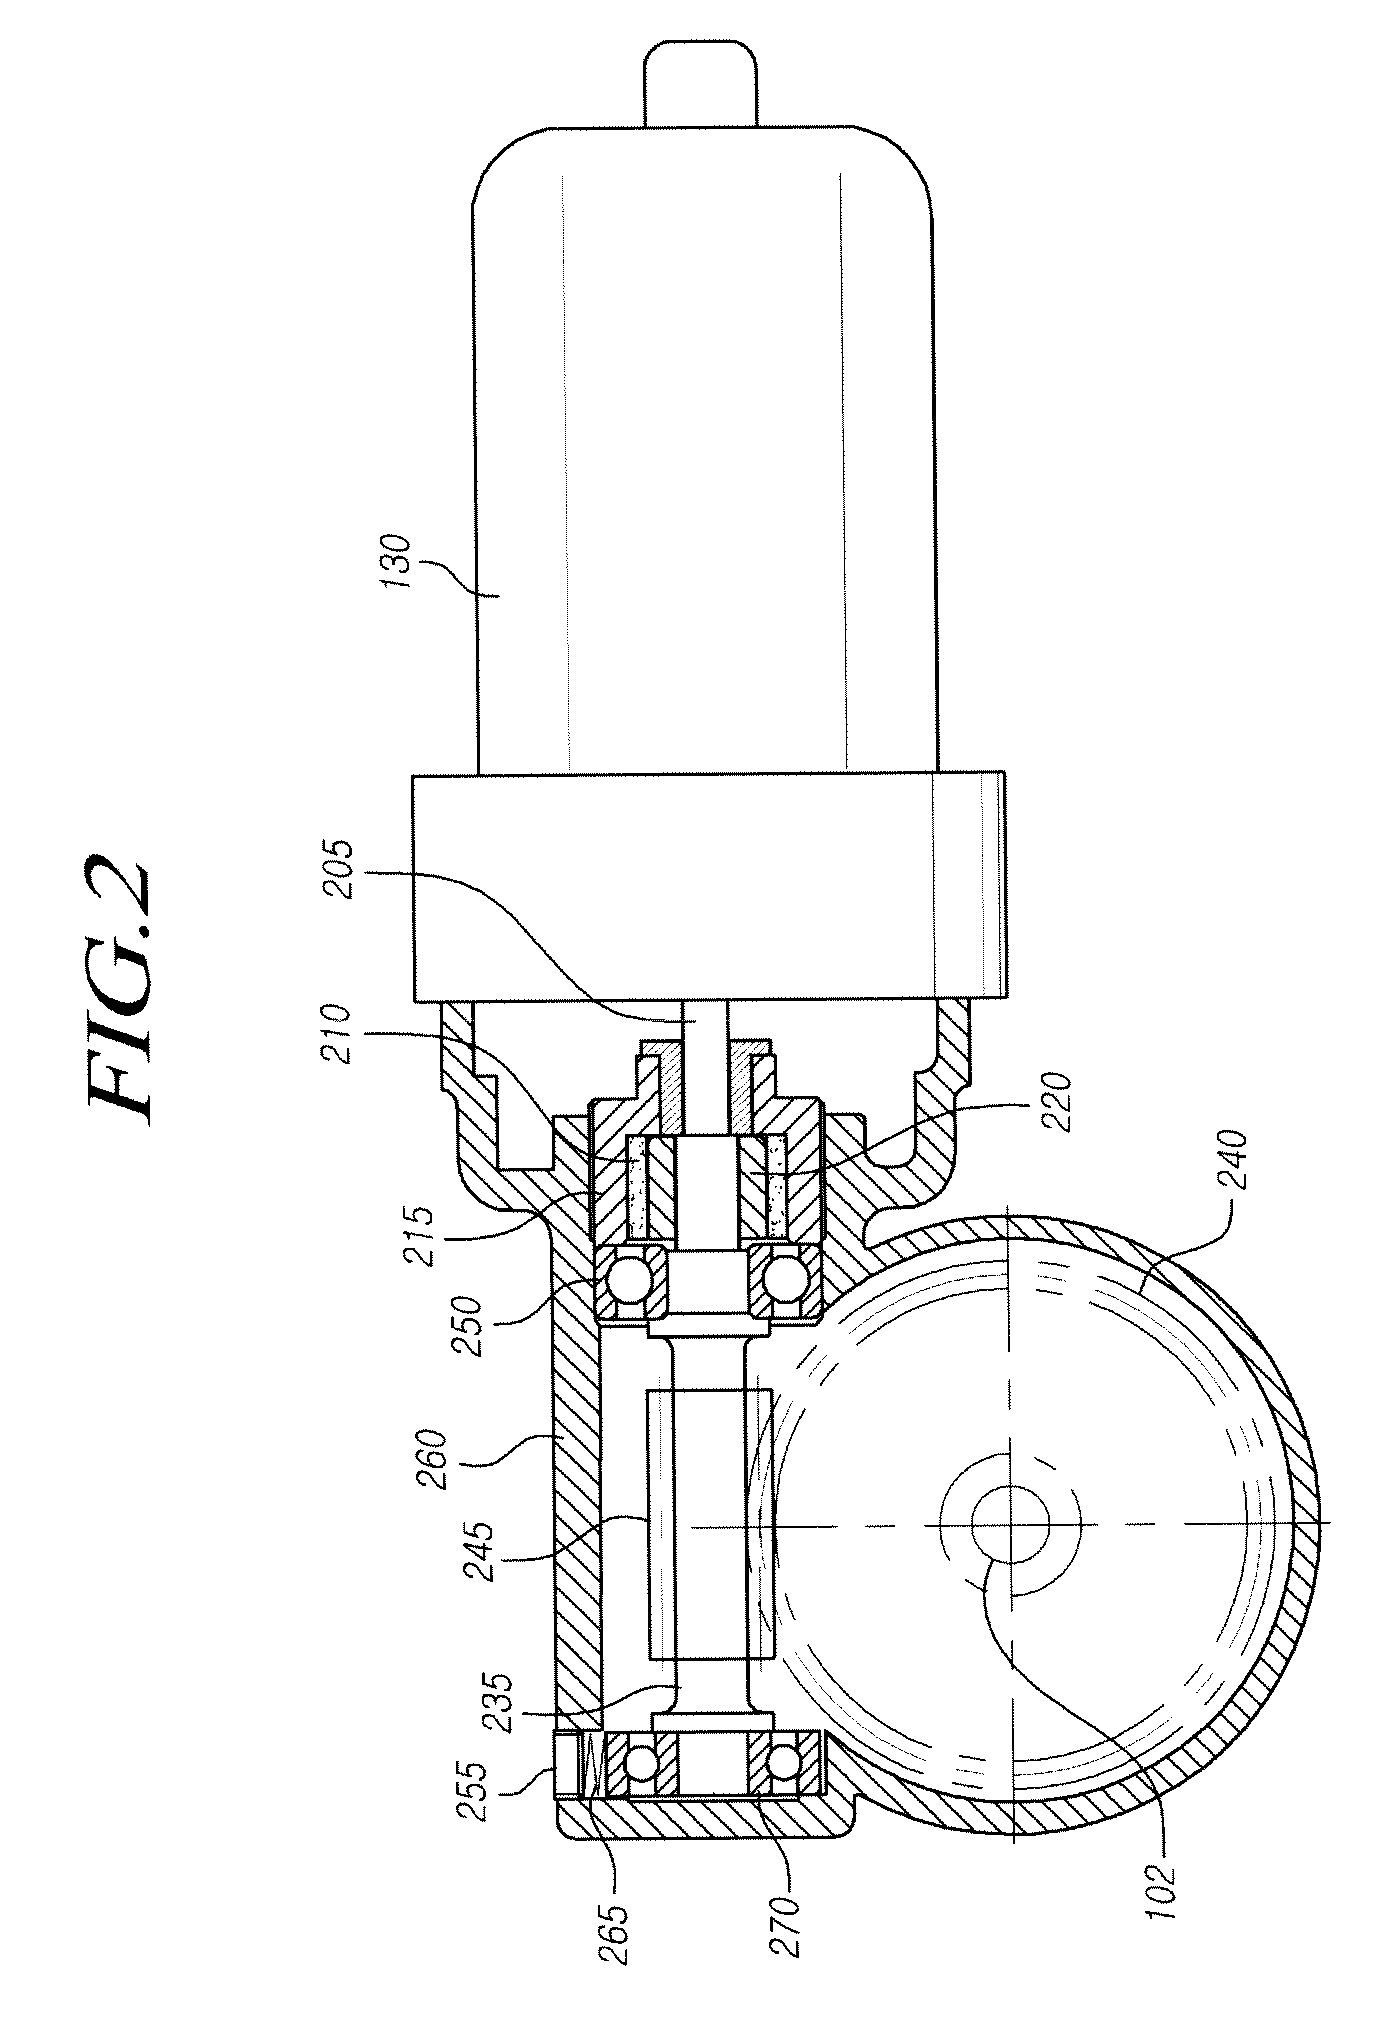 Reducer of electric power steering system